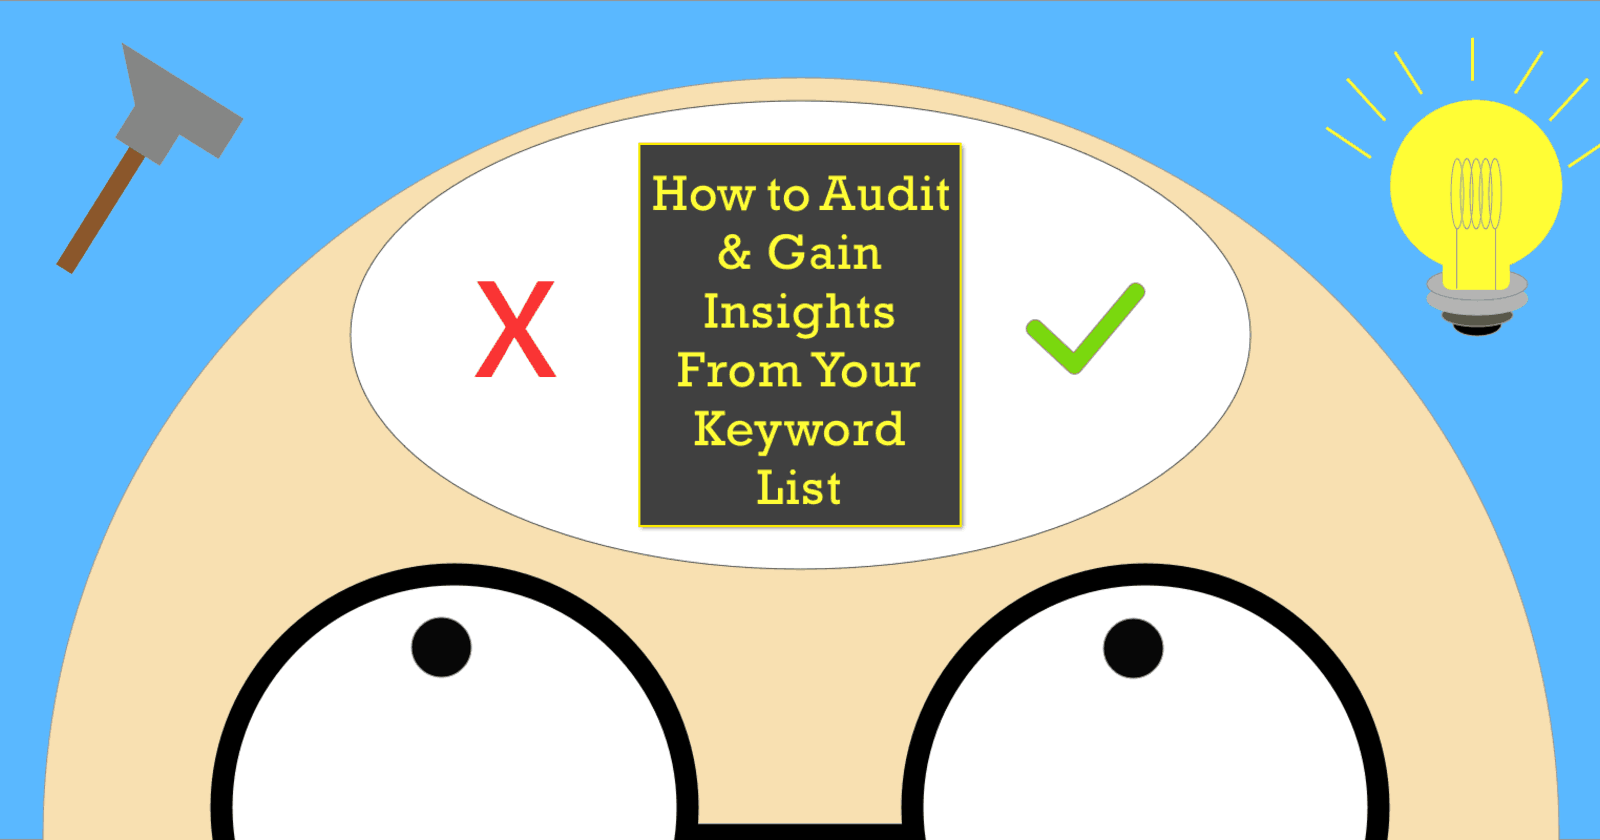 How-to-Audit-and-Gain-Insights-From-Your-Keyword-List